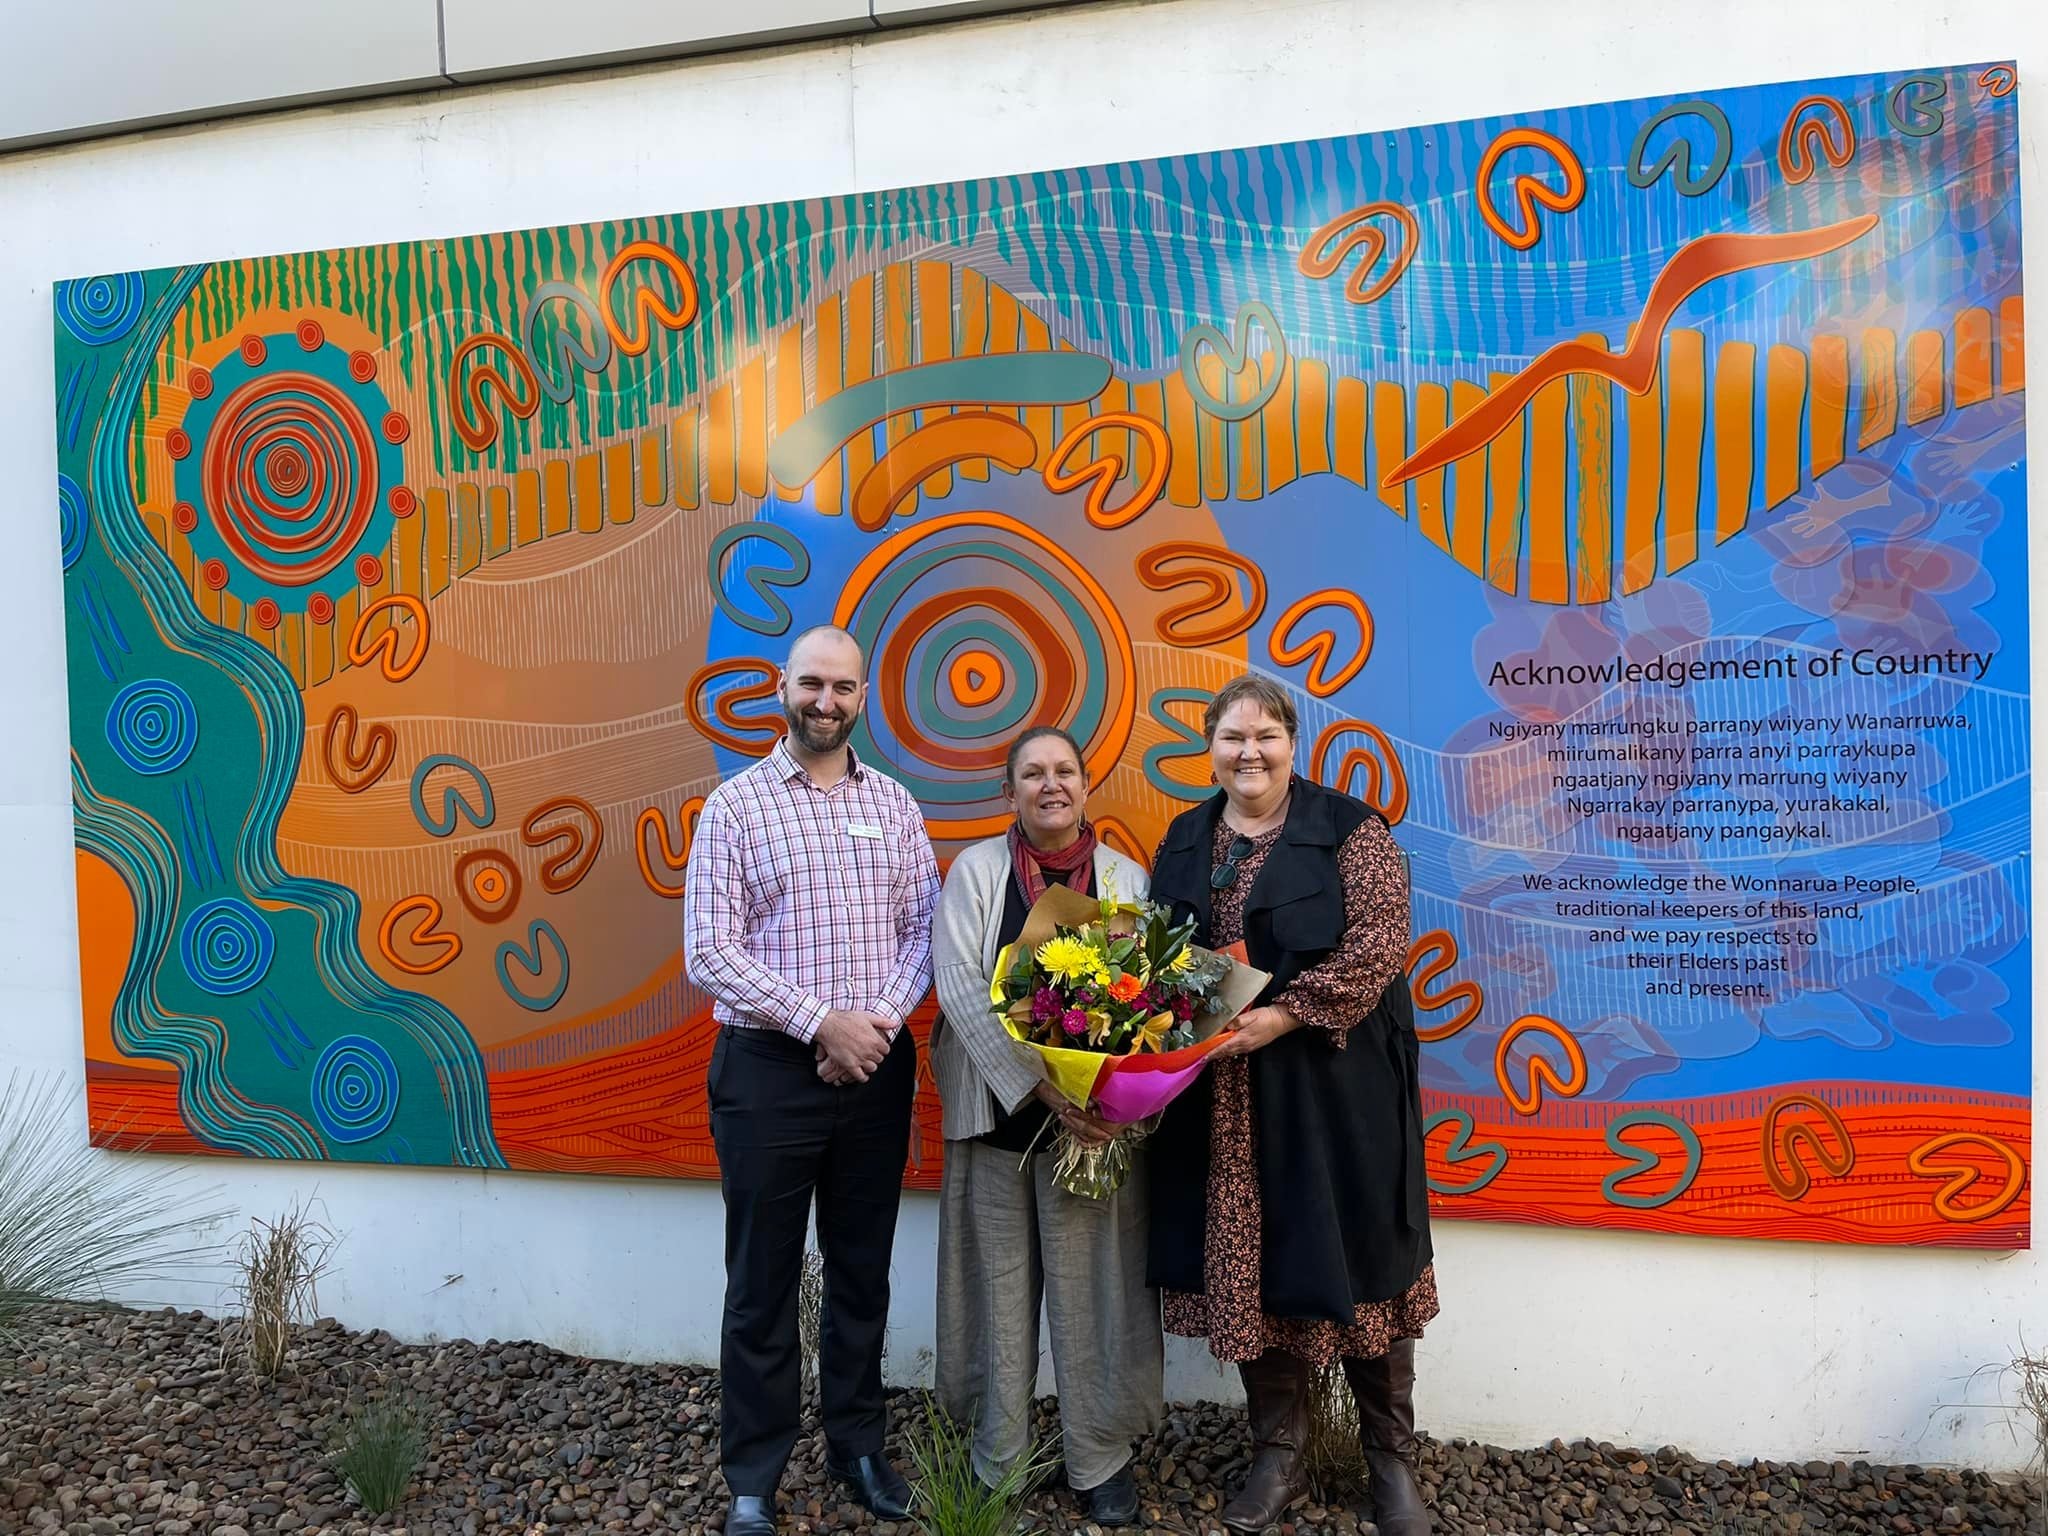 MAITLAND MERCURY - Mural by local Indigenous artist Saretta Fielding revealed at Maitland Private Hospital